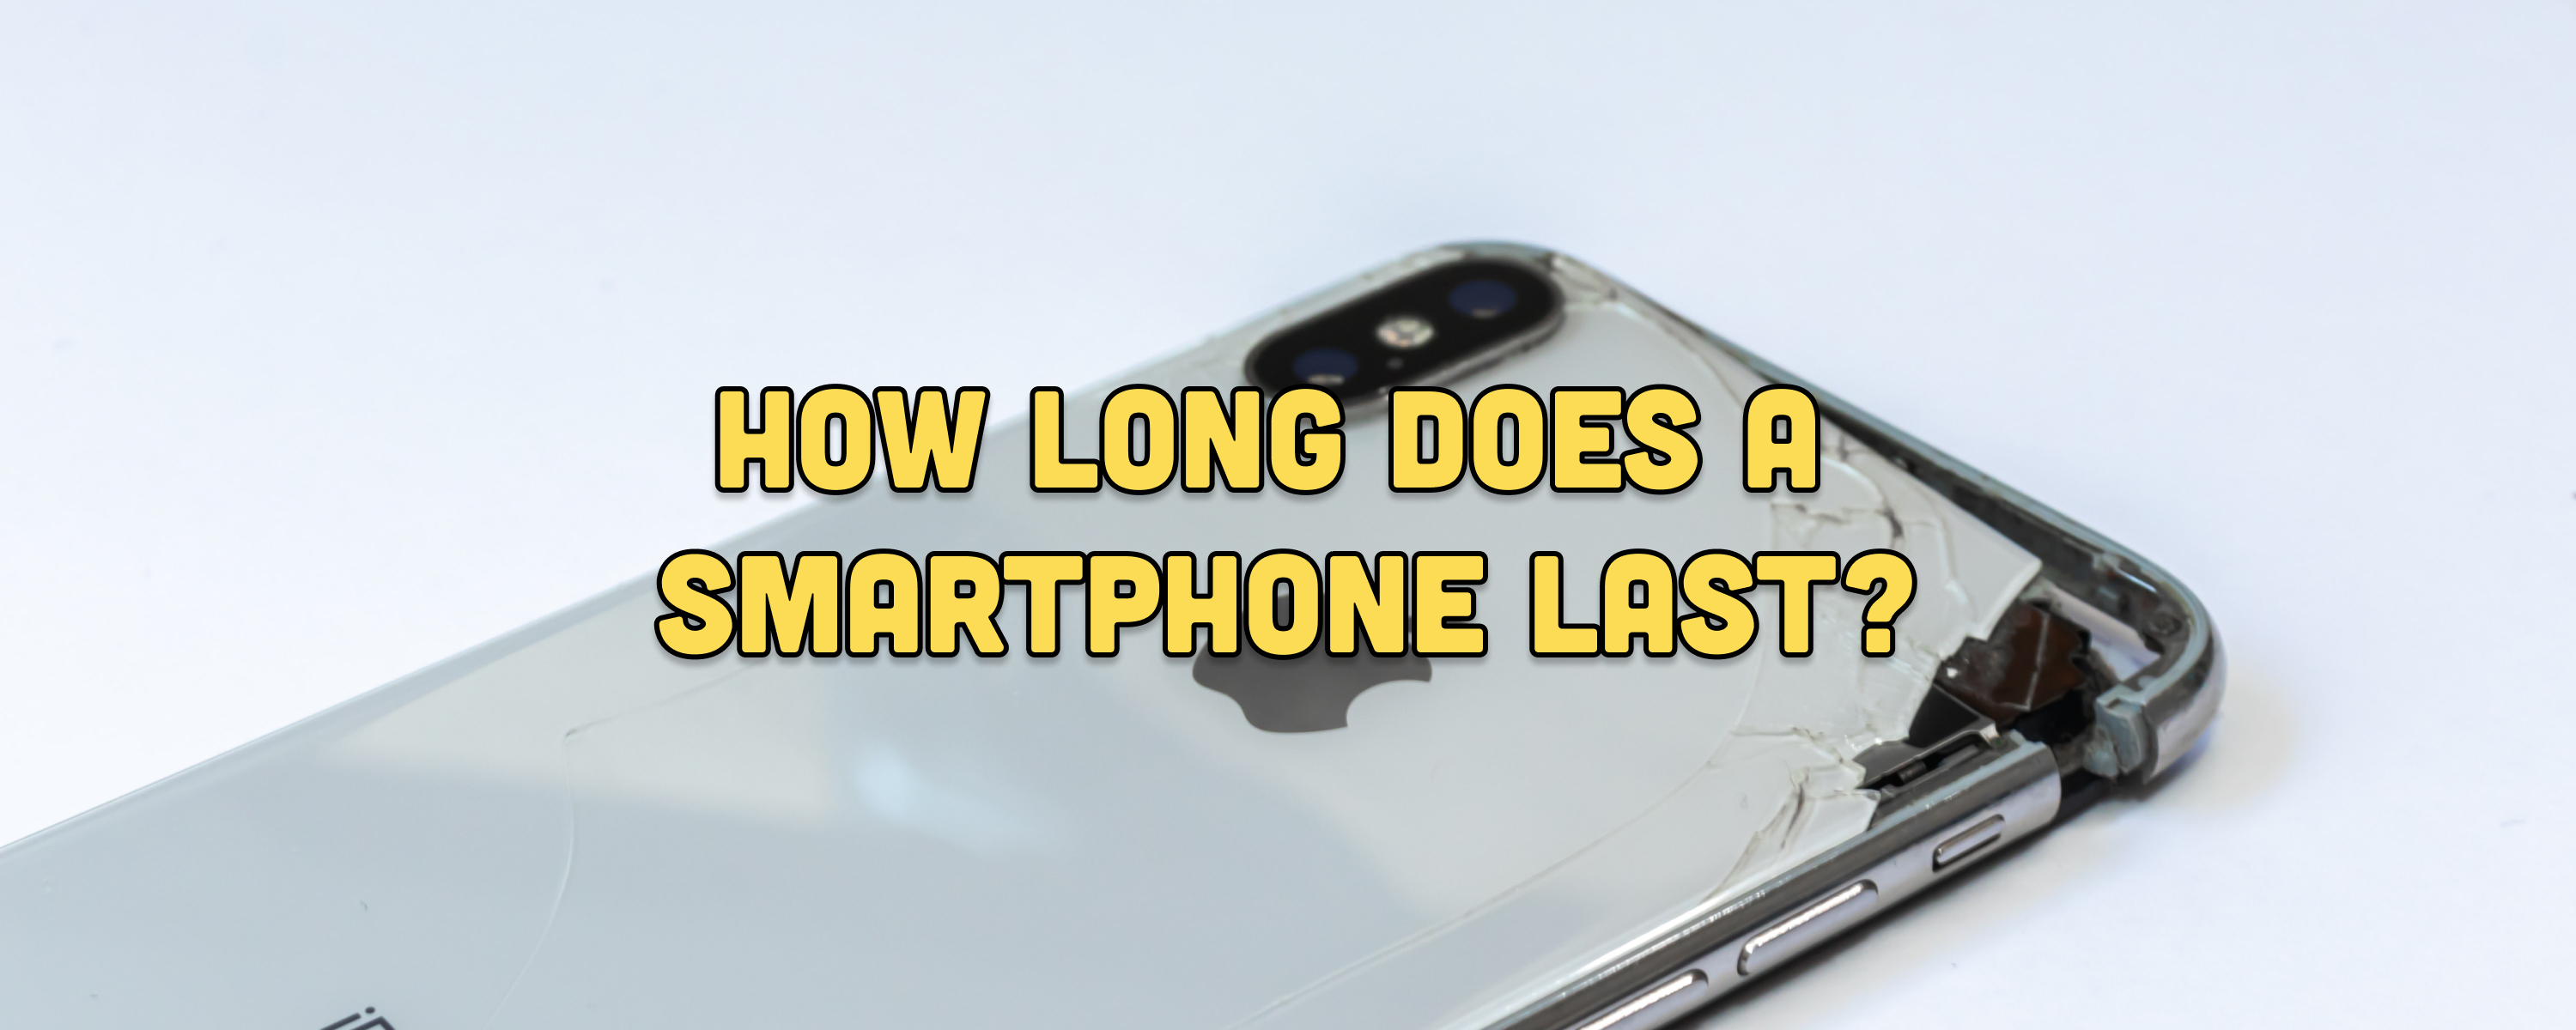 How Long Does a Smartphone Last?